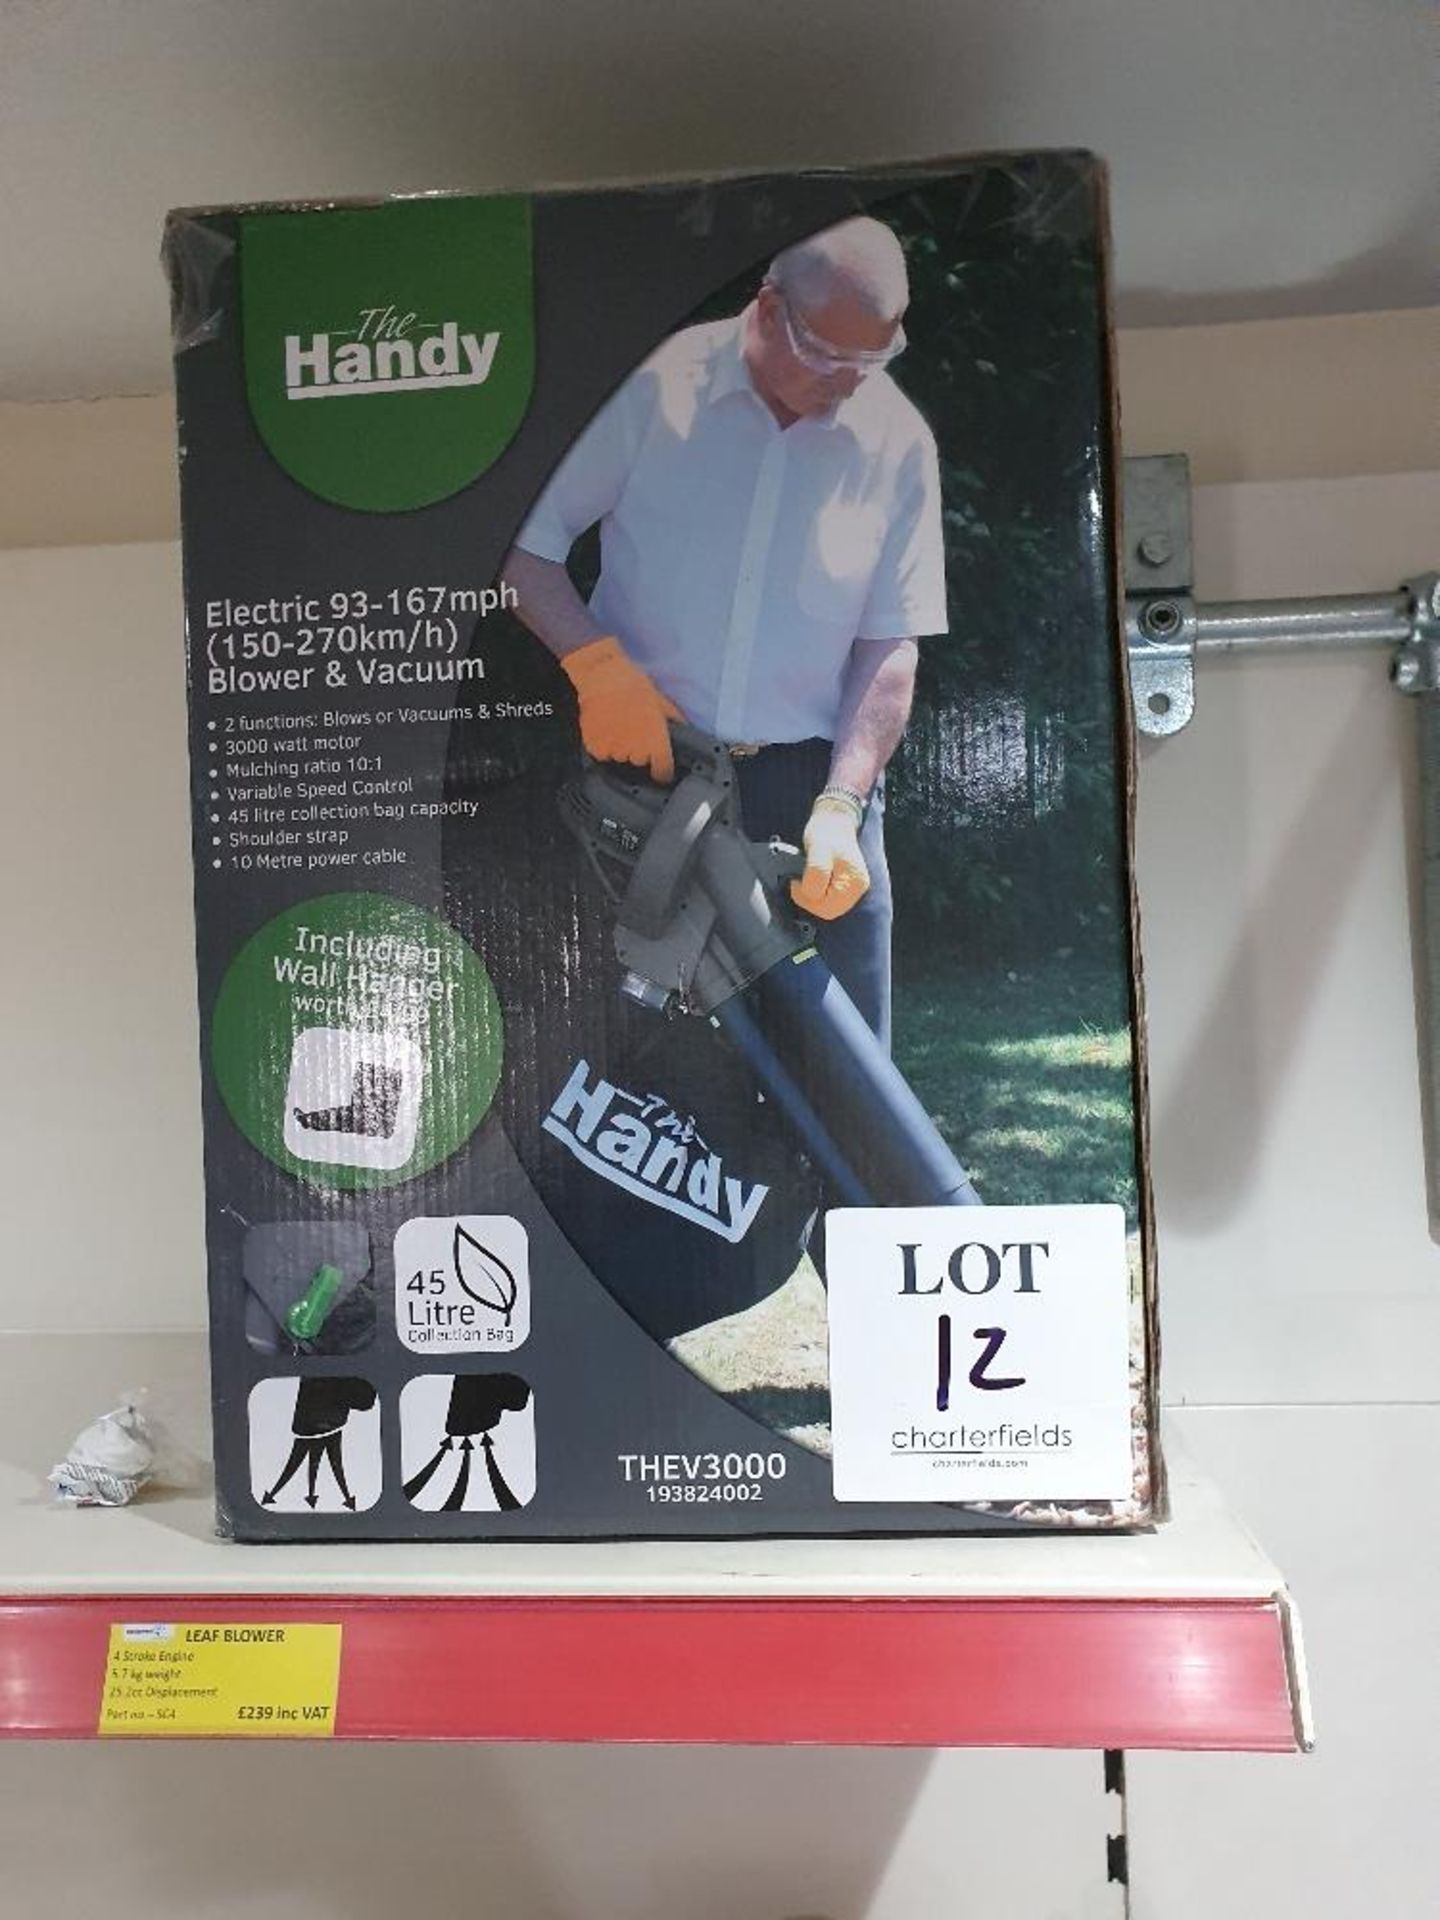 The Handy electric blower and vacuum